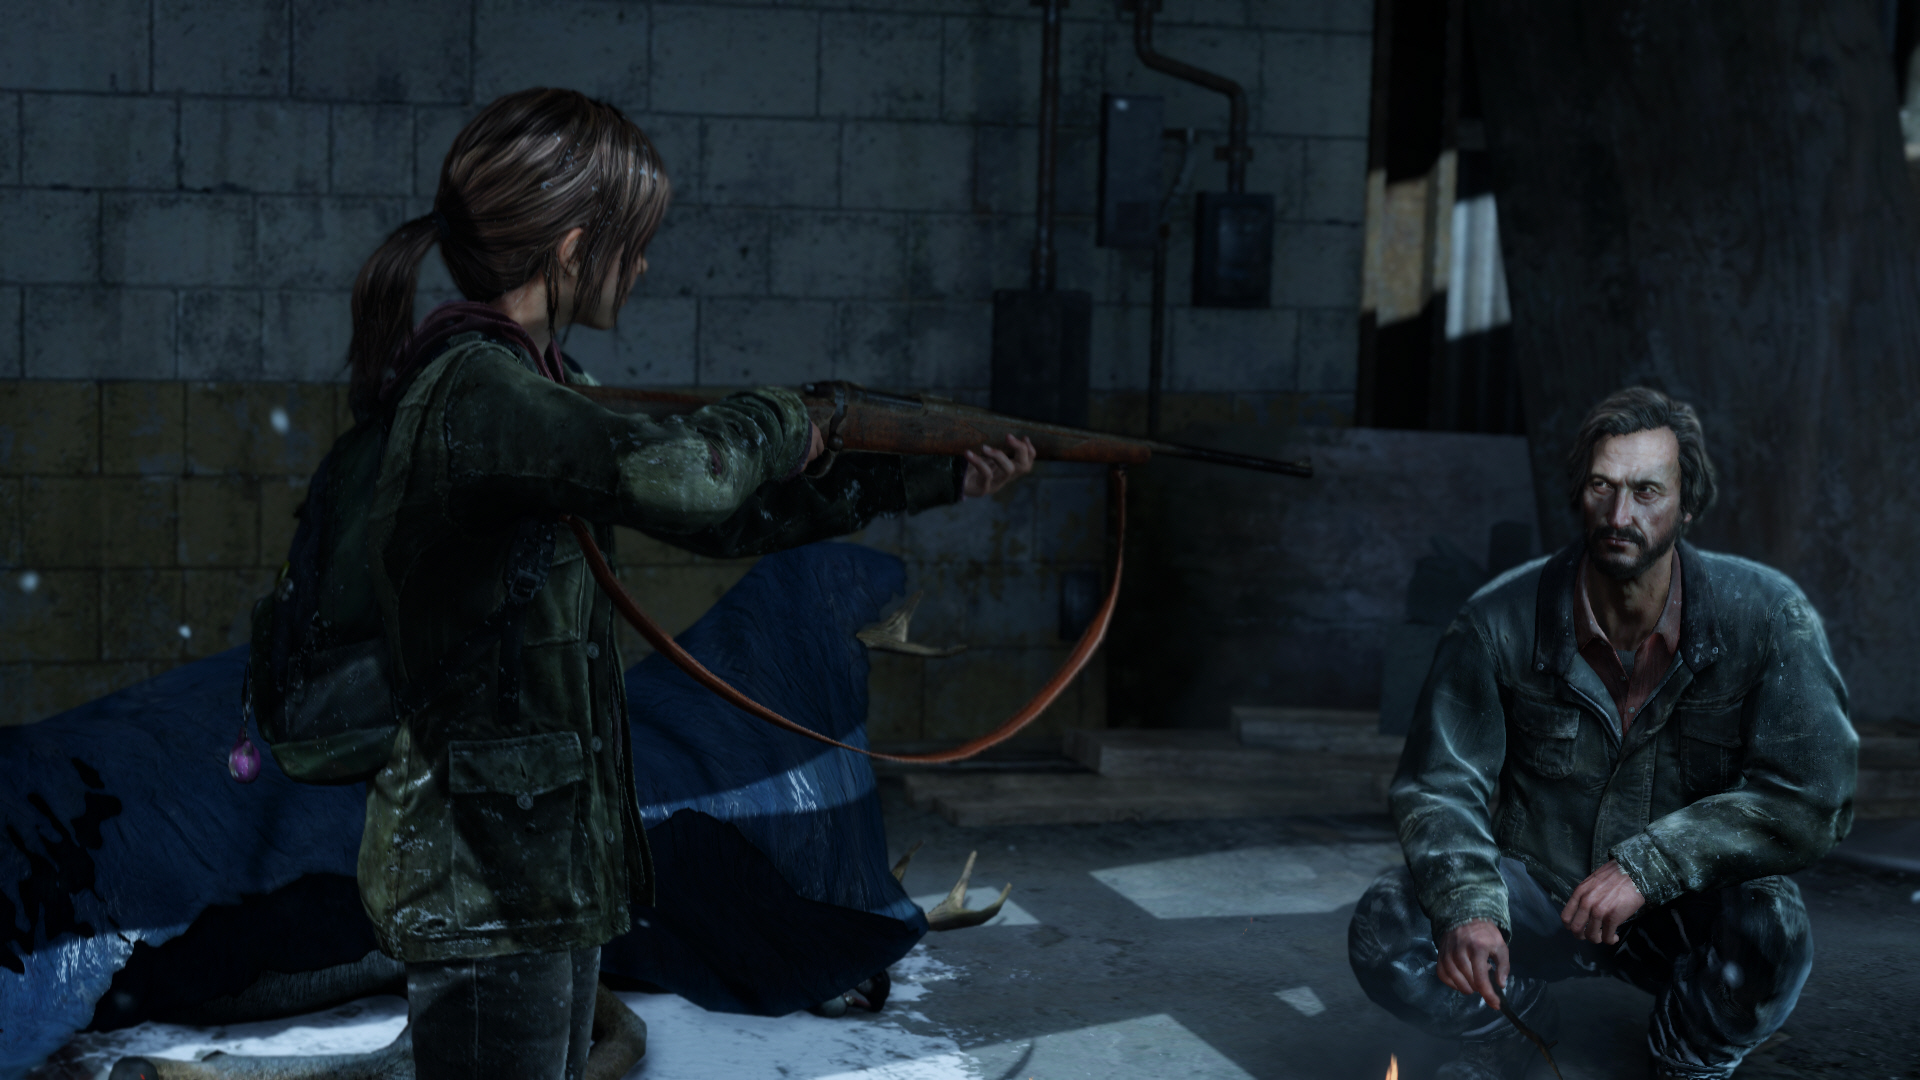 Slecht Winkelier club The Last of Us Remastered Video Walkthrough in HD | Game Guide